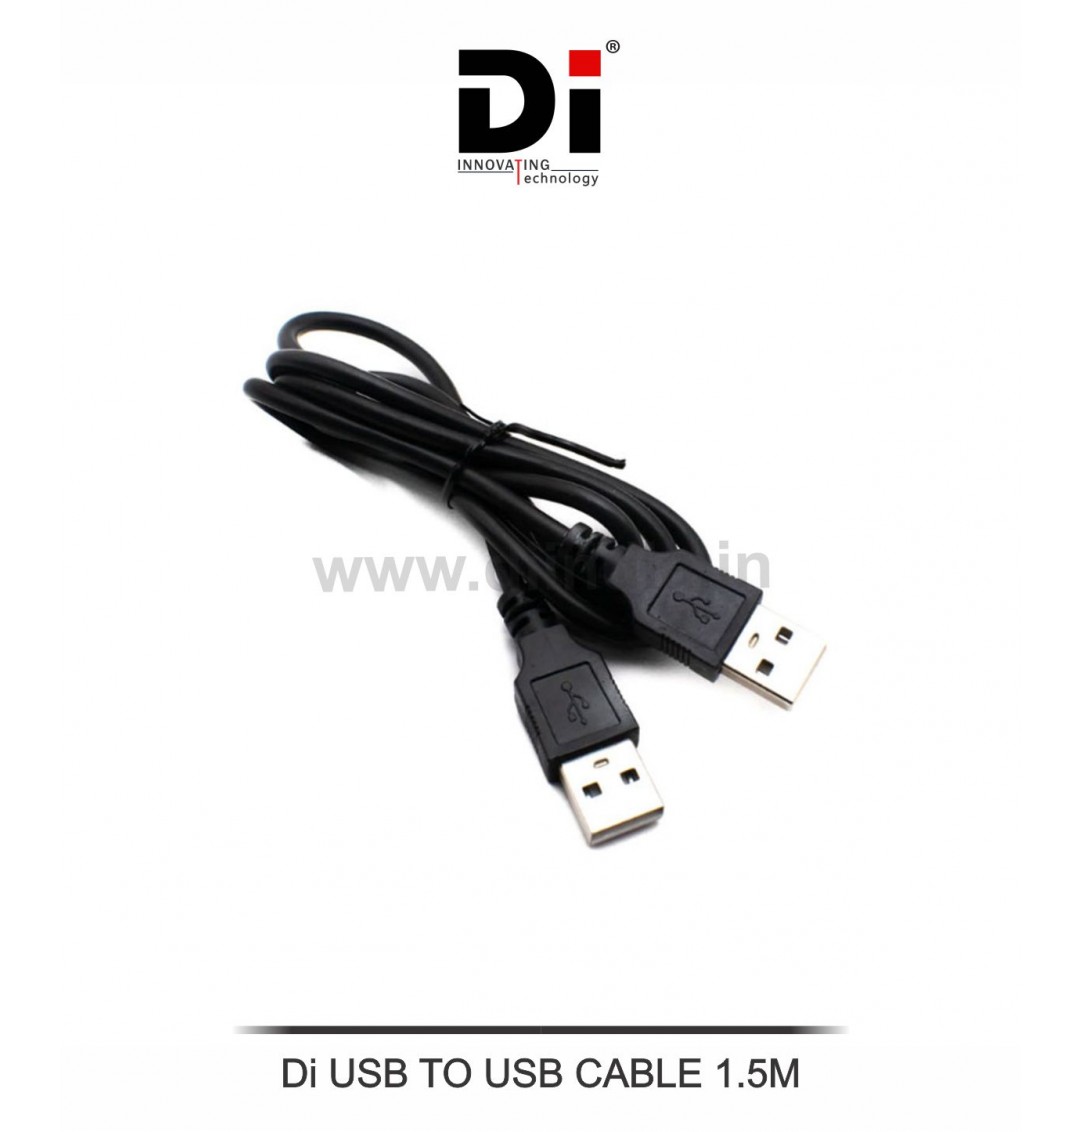 Di USB A TO USB A CABLE 1.5M (MALE TO MALE)